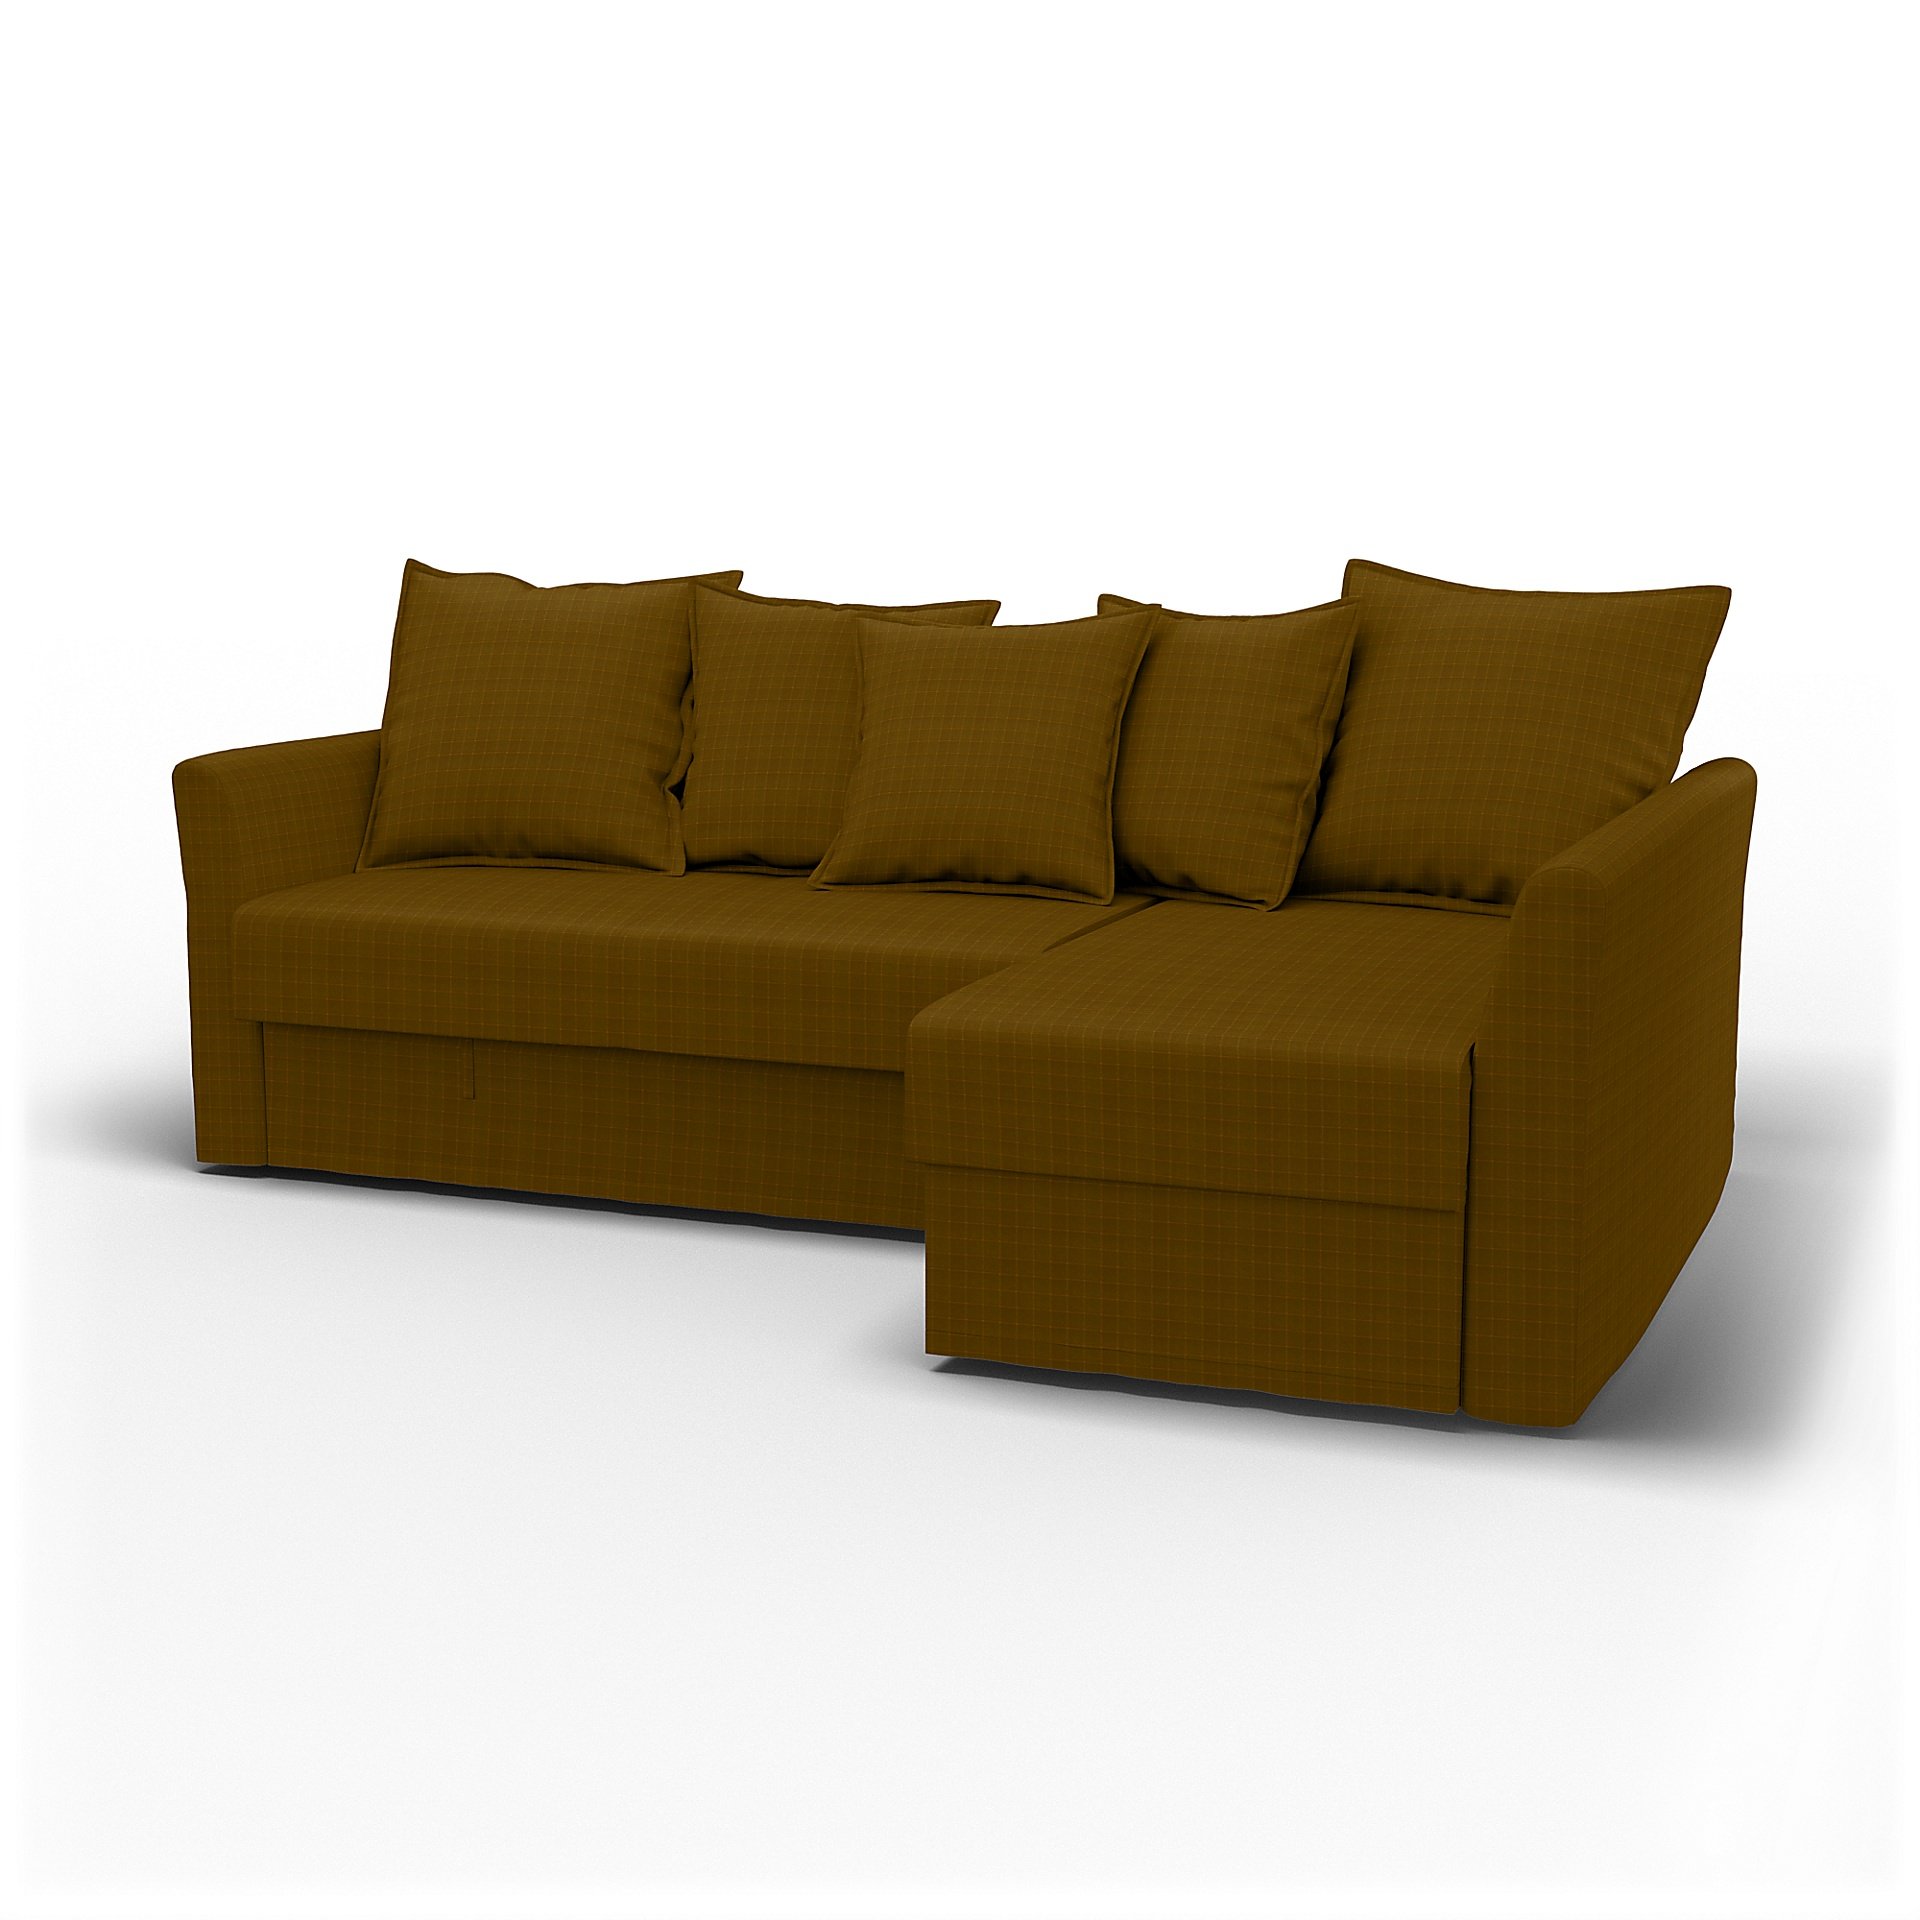 IKEA - Holmsund Sofabed with Chaiselongue, Turmeric, Velvet - Bemz